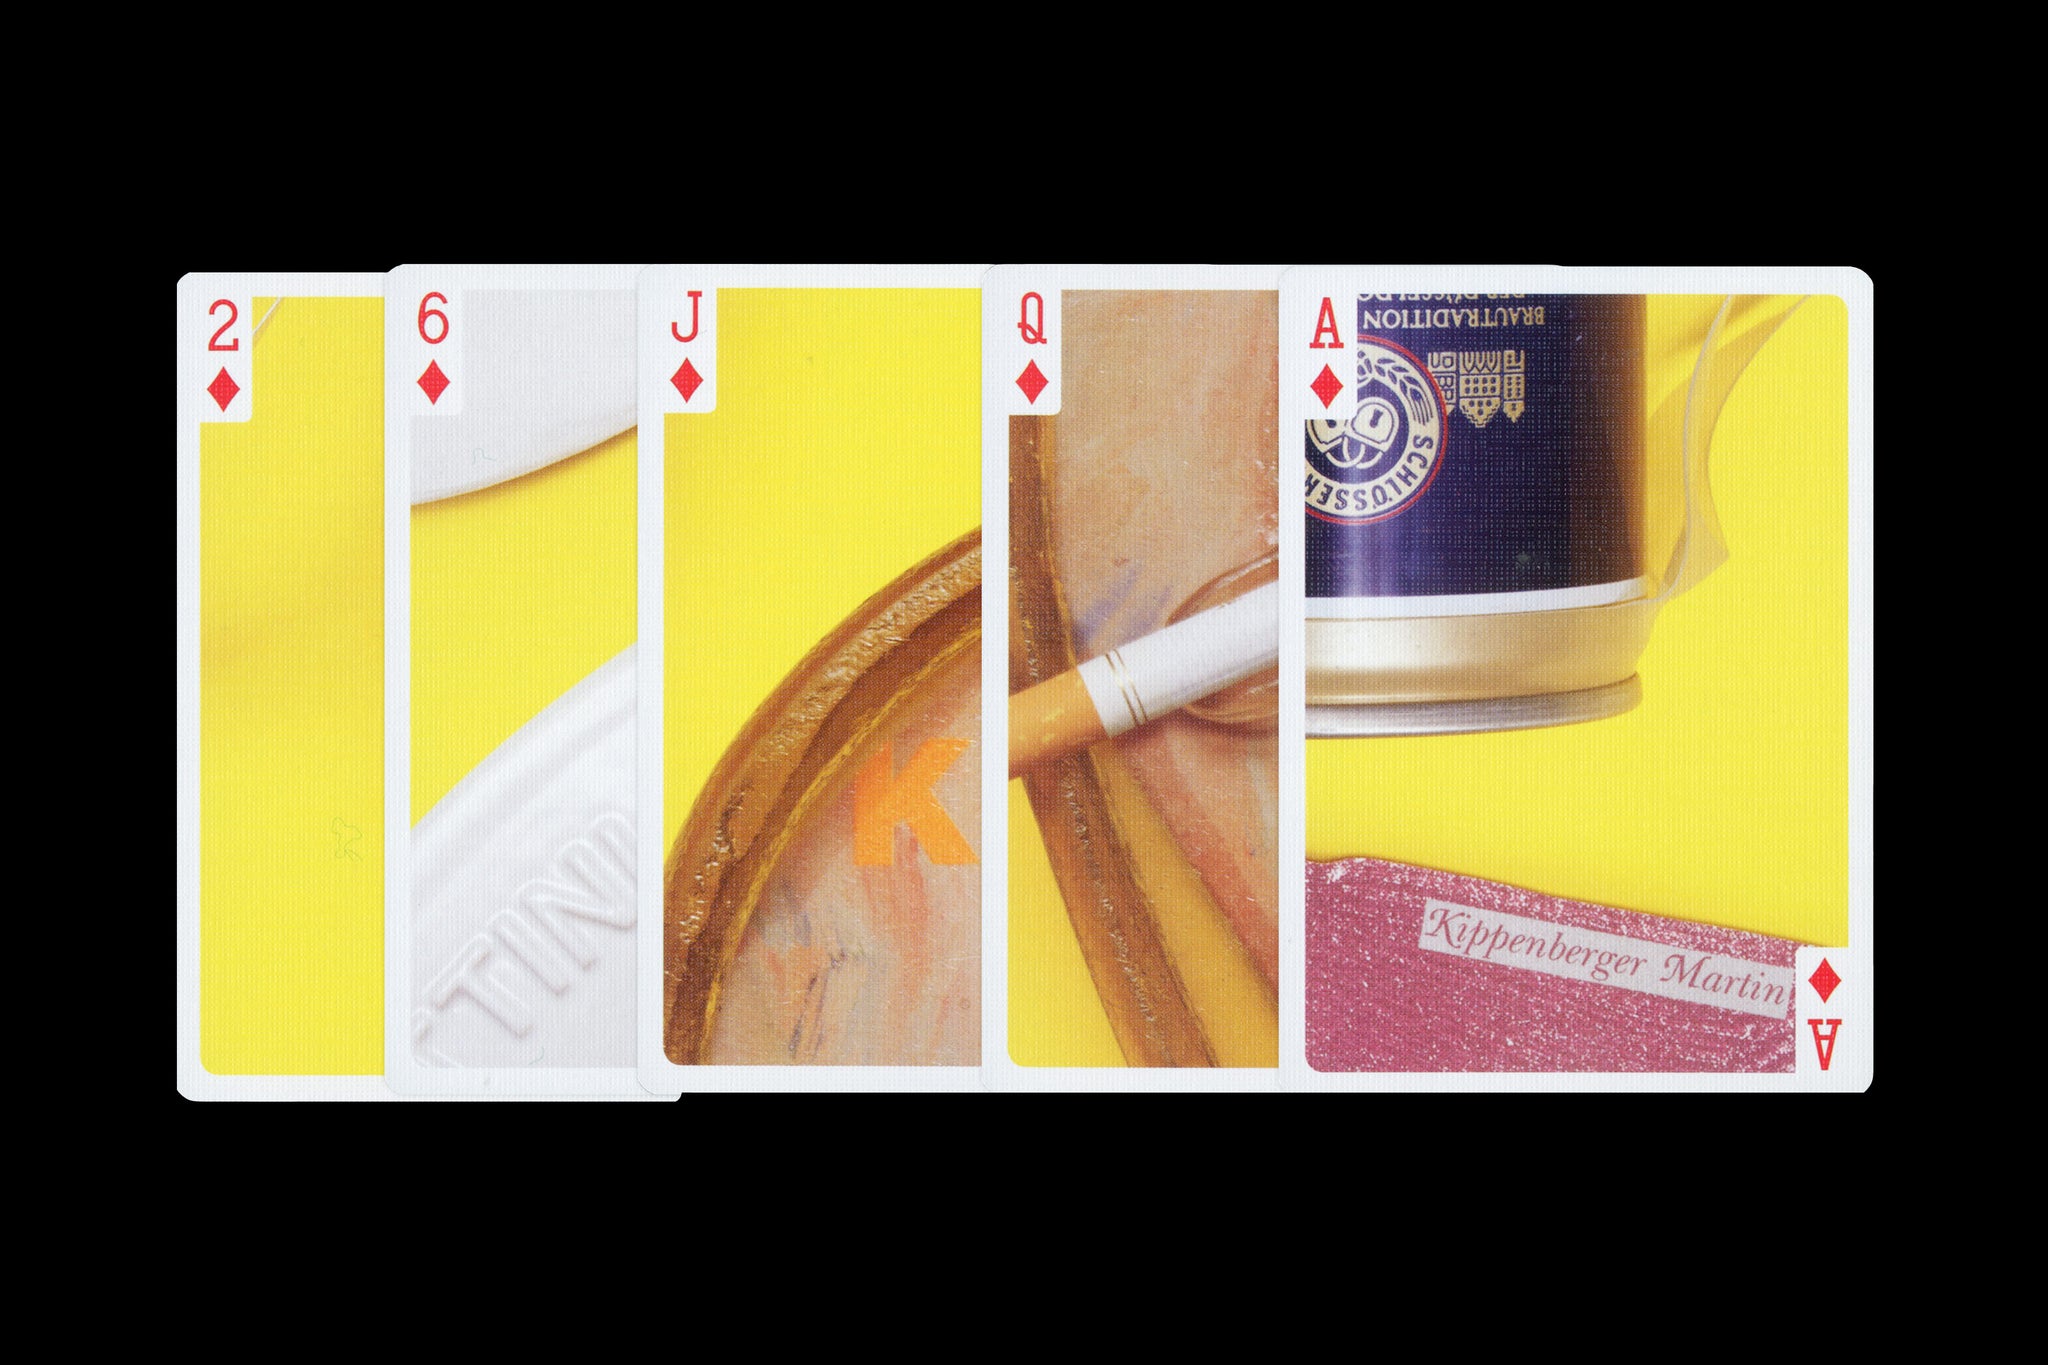 A collection of nine Kippenberger editions, ~one Boetti watch, a cigarette and yellow